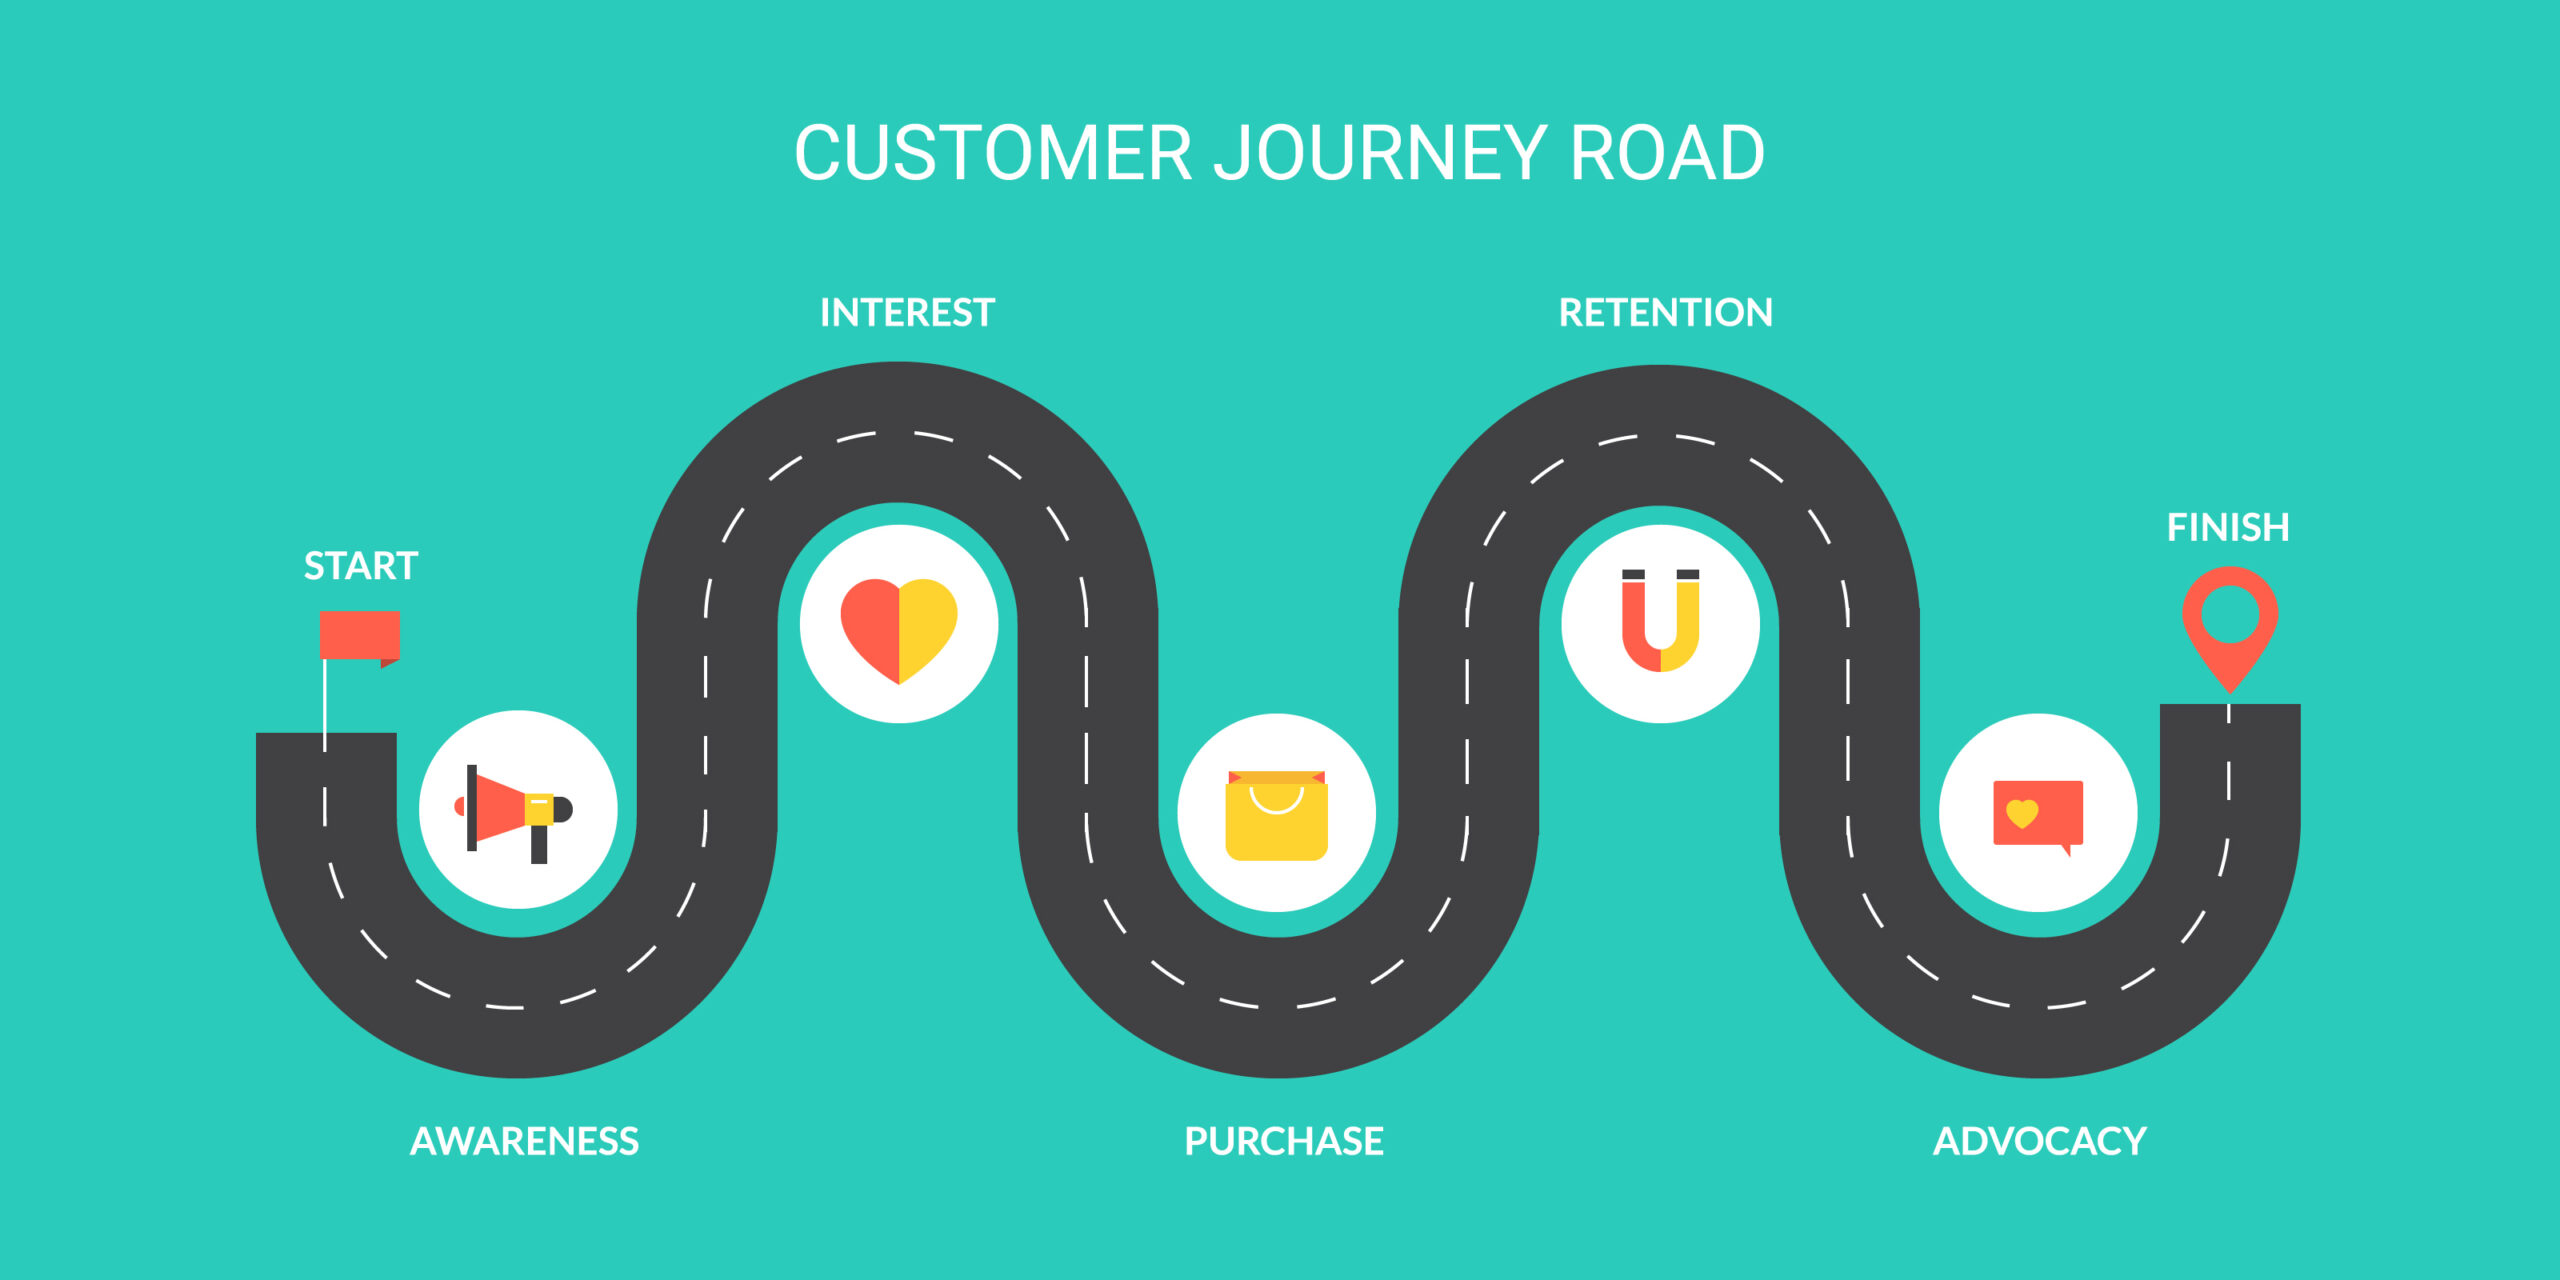 How a customer journey map can help you weed out pressure points and innovate